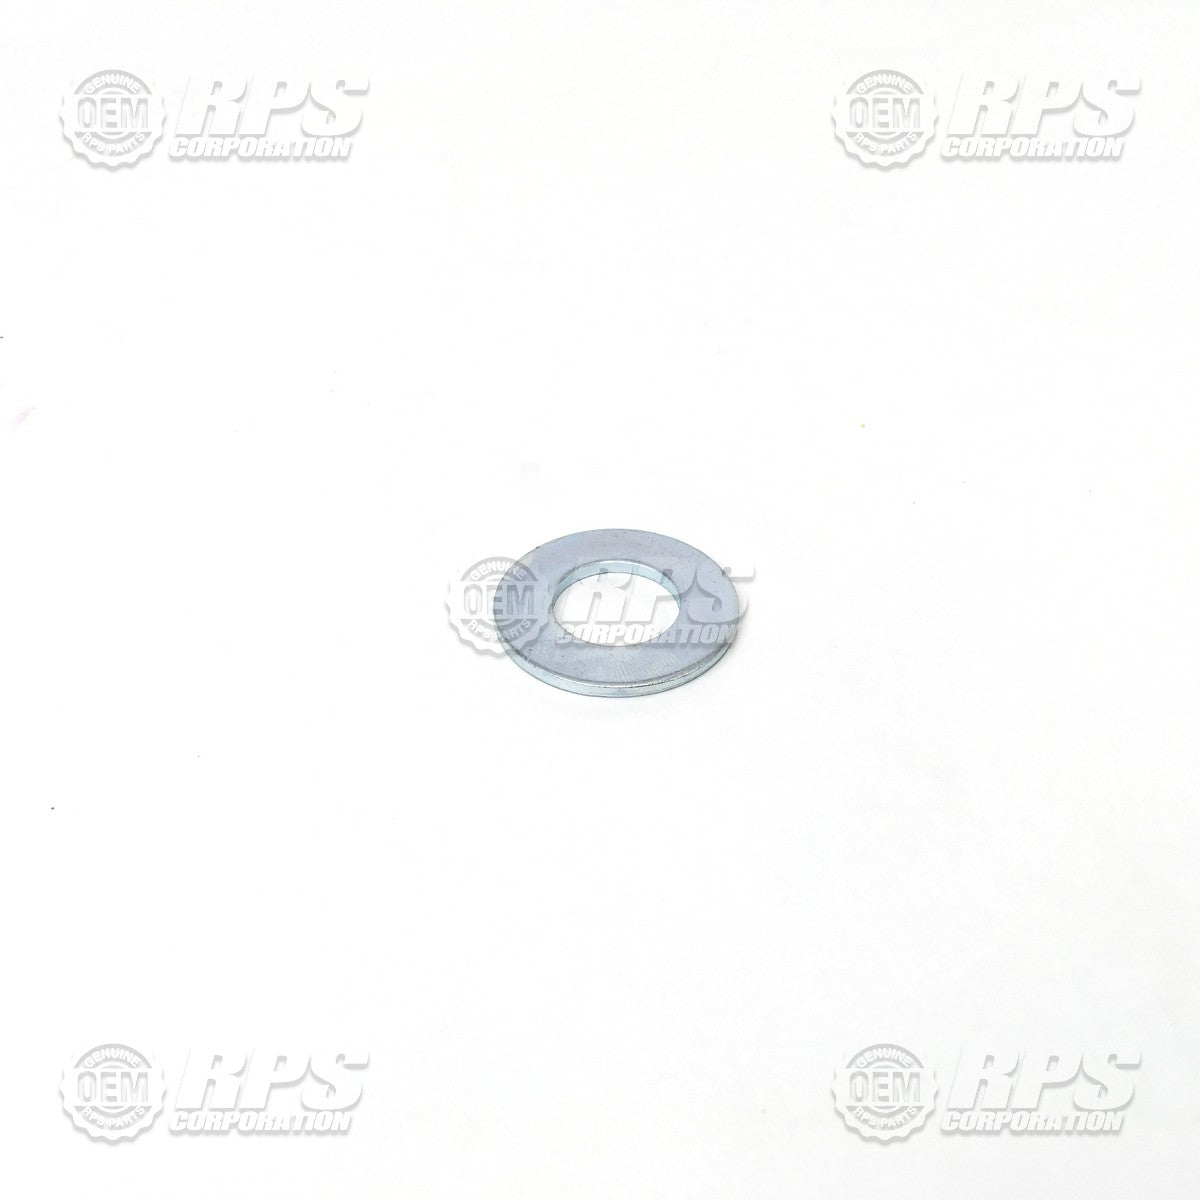 FactoryCat/Tomcat H-00797, Washer,.669"ID,Stainless